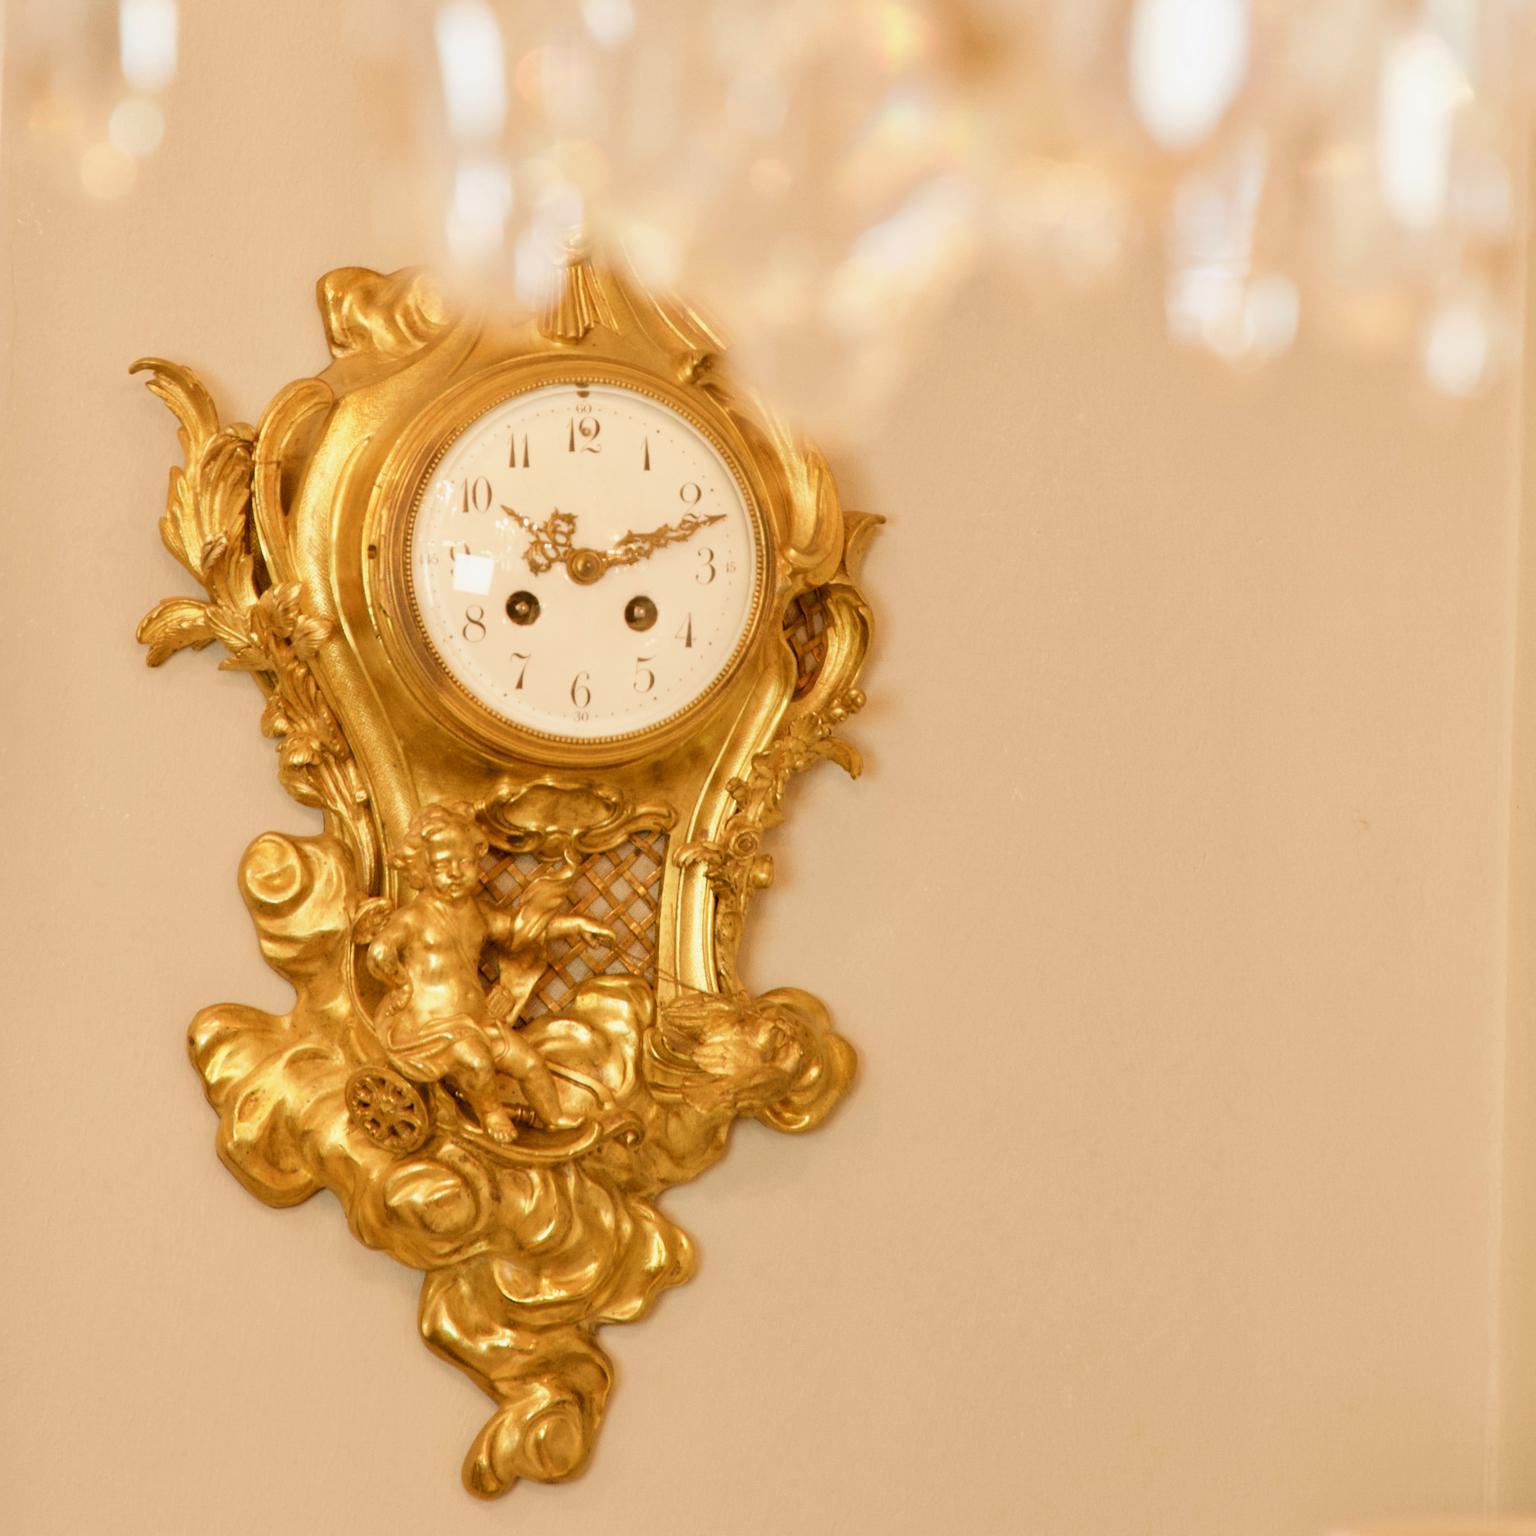 French 19th Century Louis XV Gilt Bronze Amor Cartel Clock, Manner of Philippe Caffieri

The white enamel dial with Arabic numerals, contained within a cartouche-shaped case surmounted by a star, rocks and C-scrolls, flanked by acanthus leaves, the